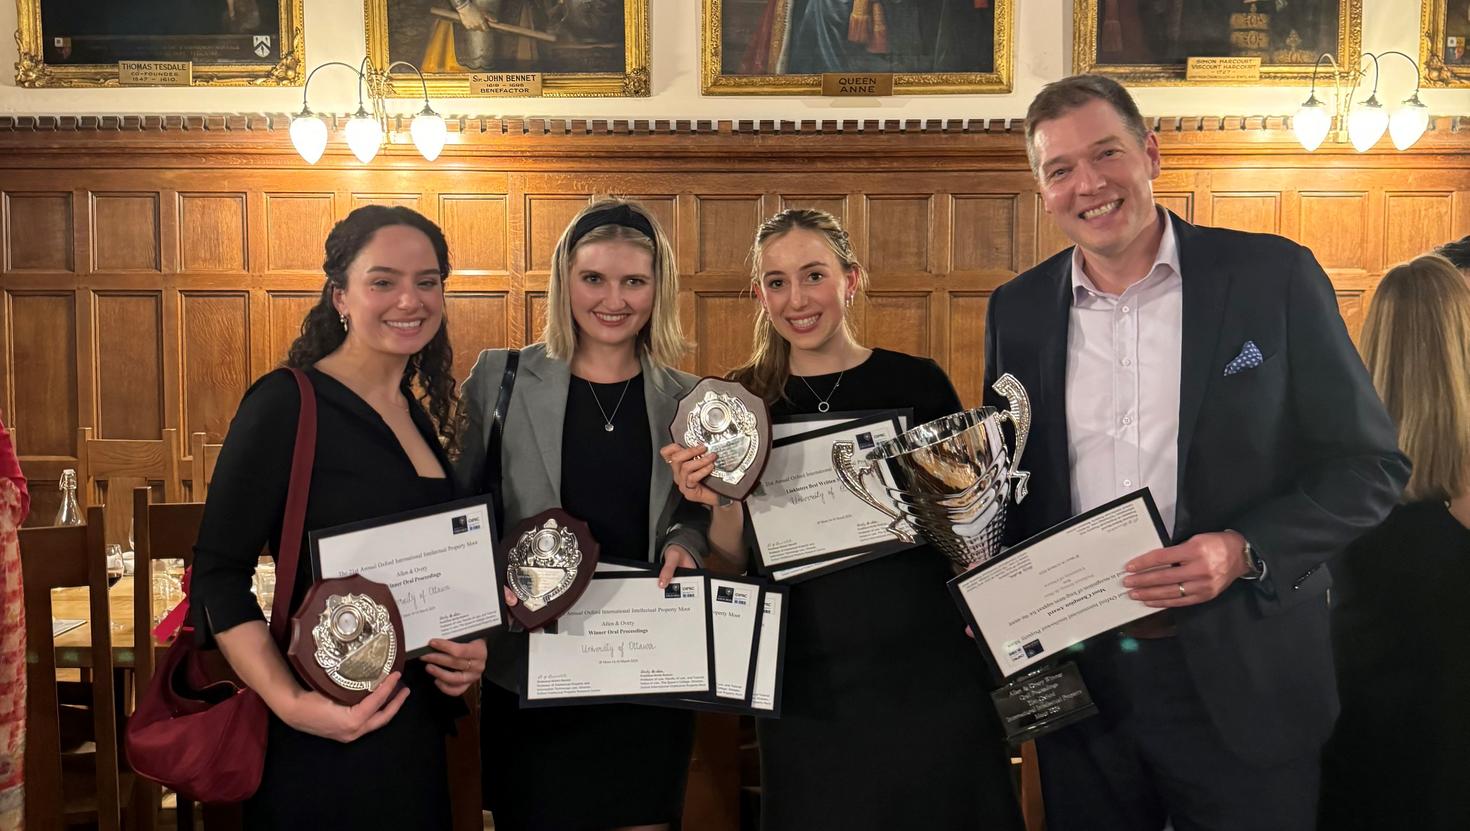 Winners of the Oxford International Intellectual Property Moot